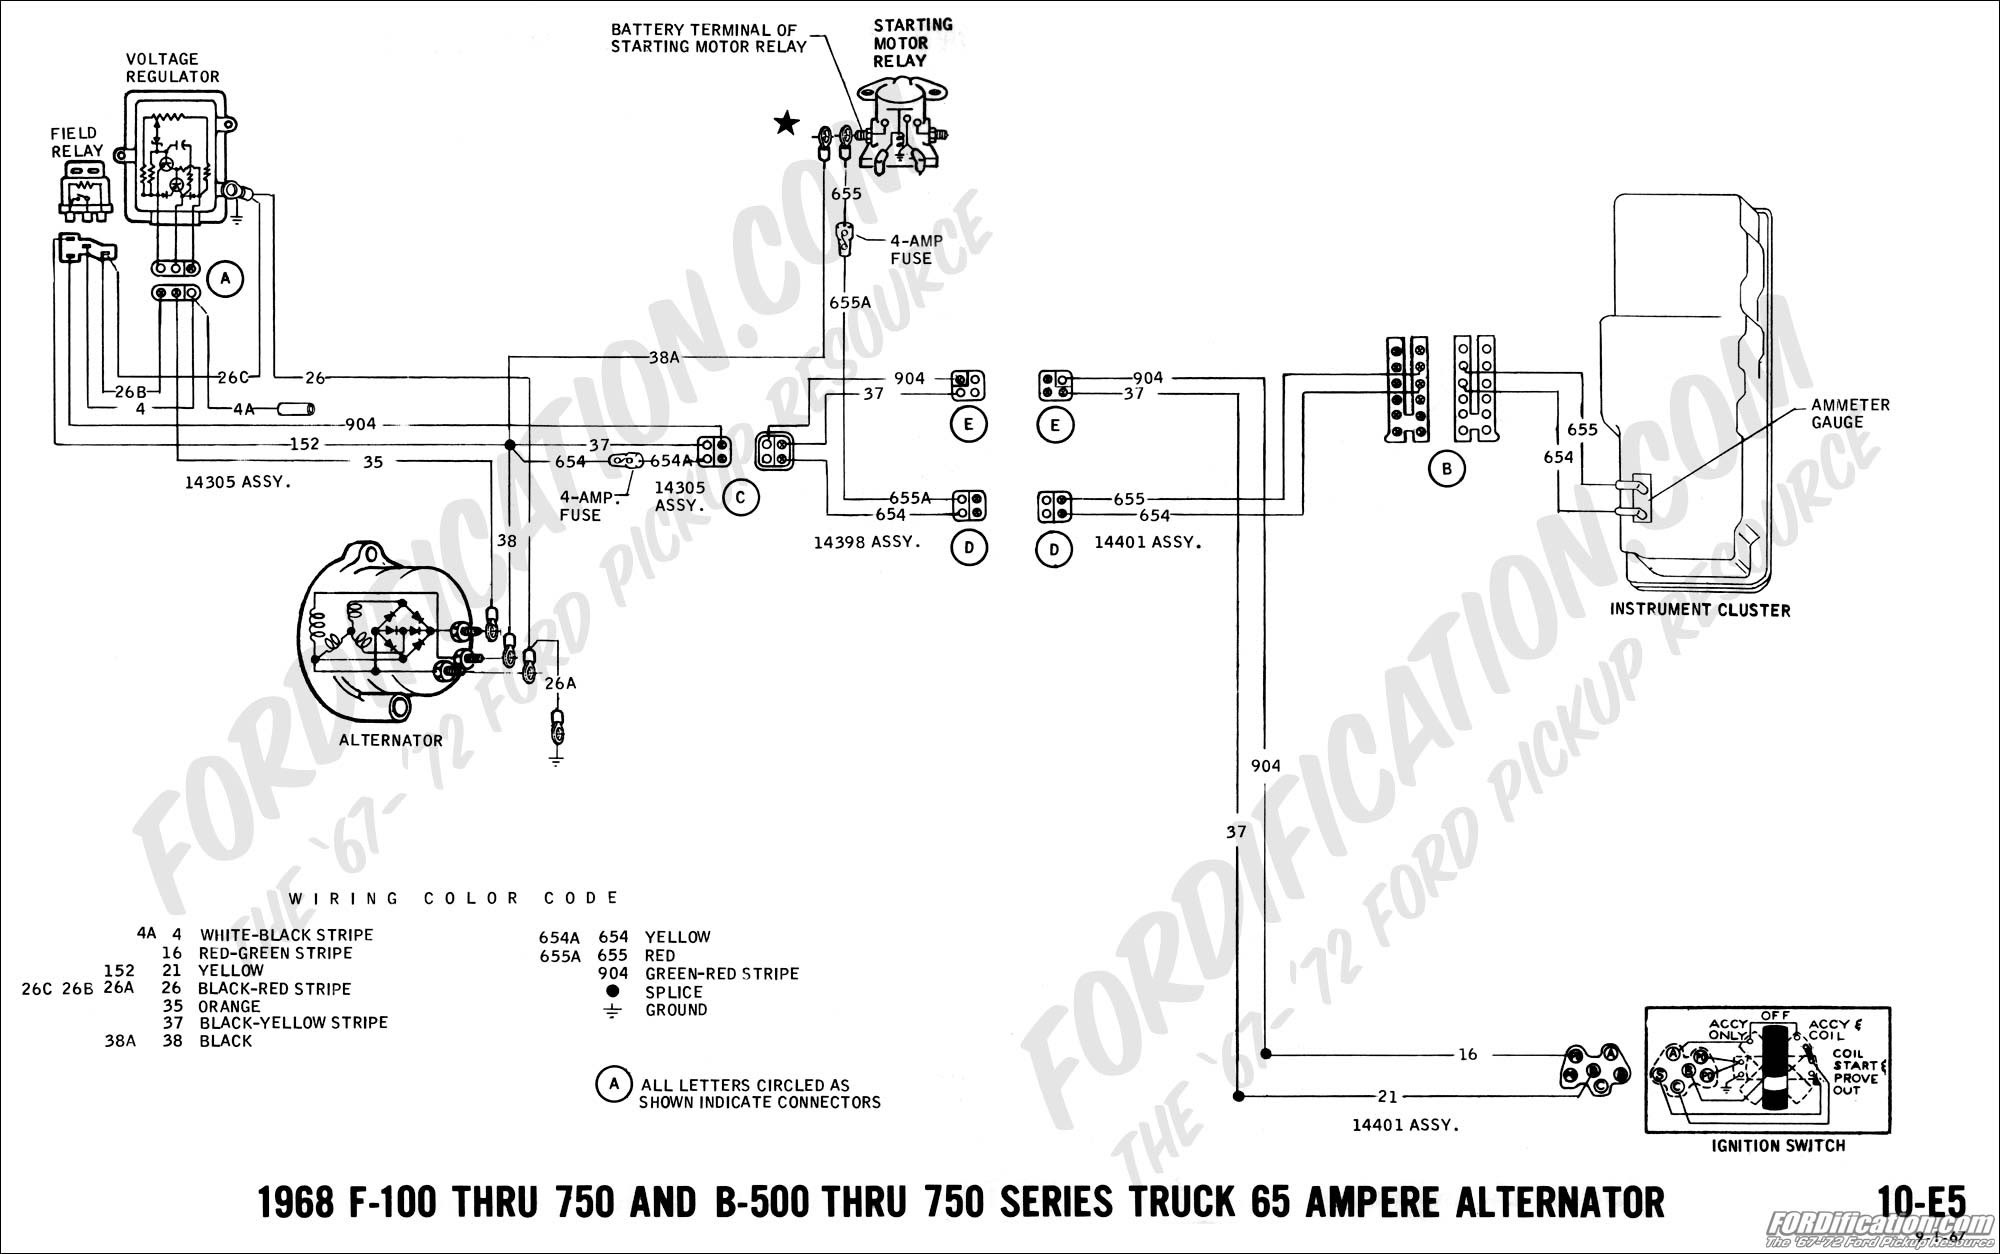 A Ford 302 Wiring Diagram - Wiring Diagram Networks